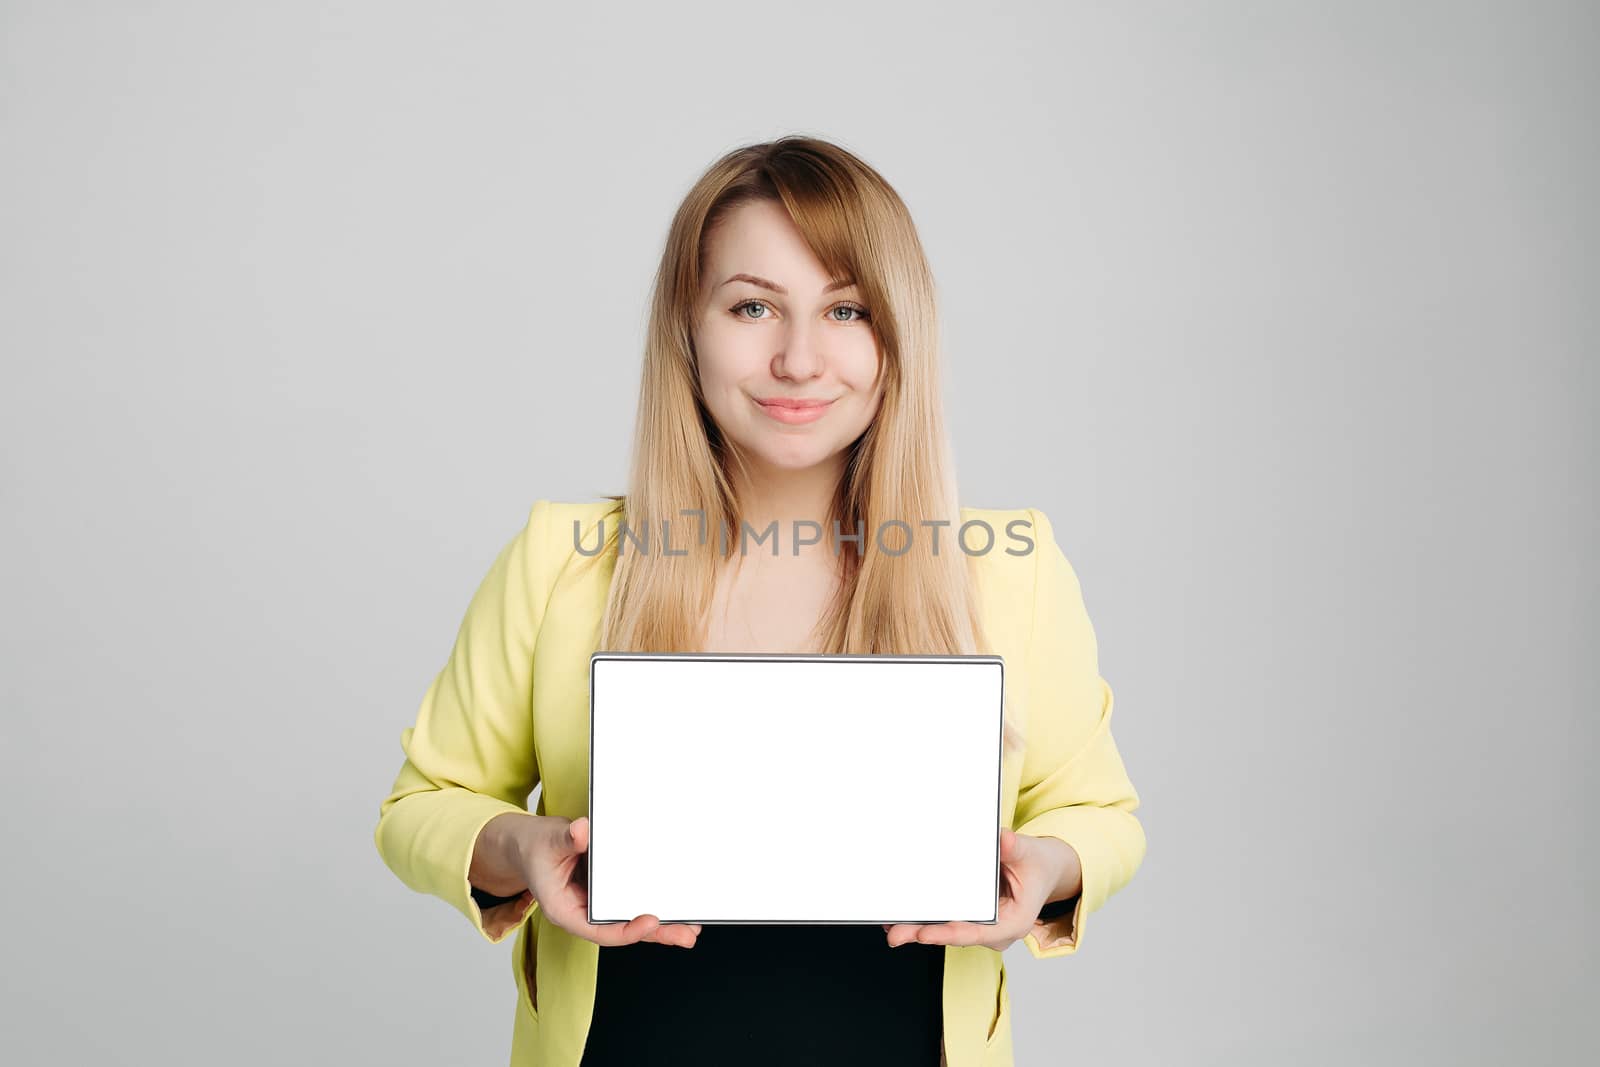 Blonde holding computer and showing at camera. by StudioLucky